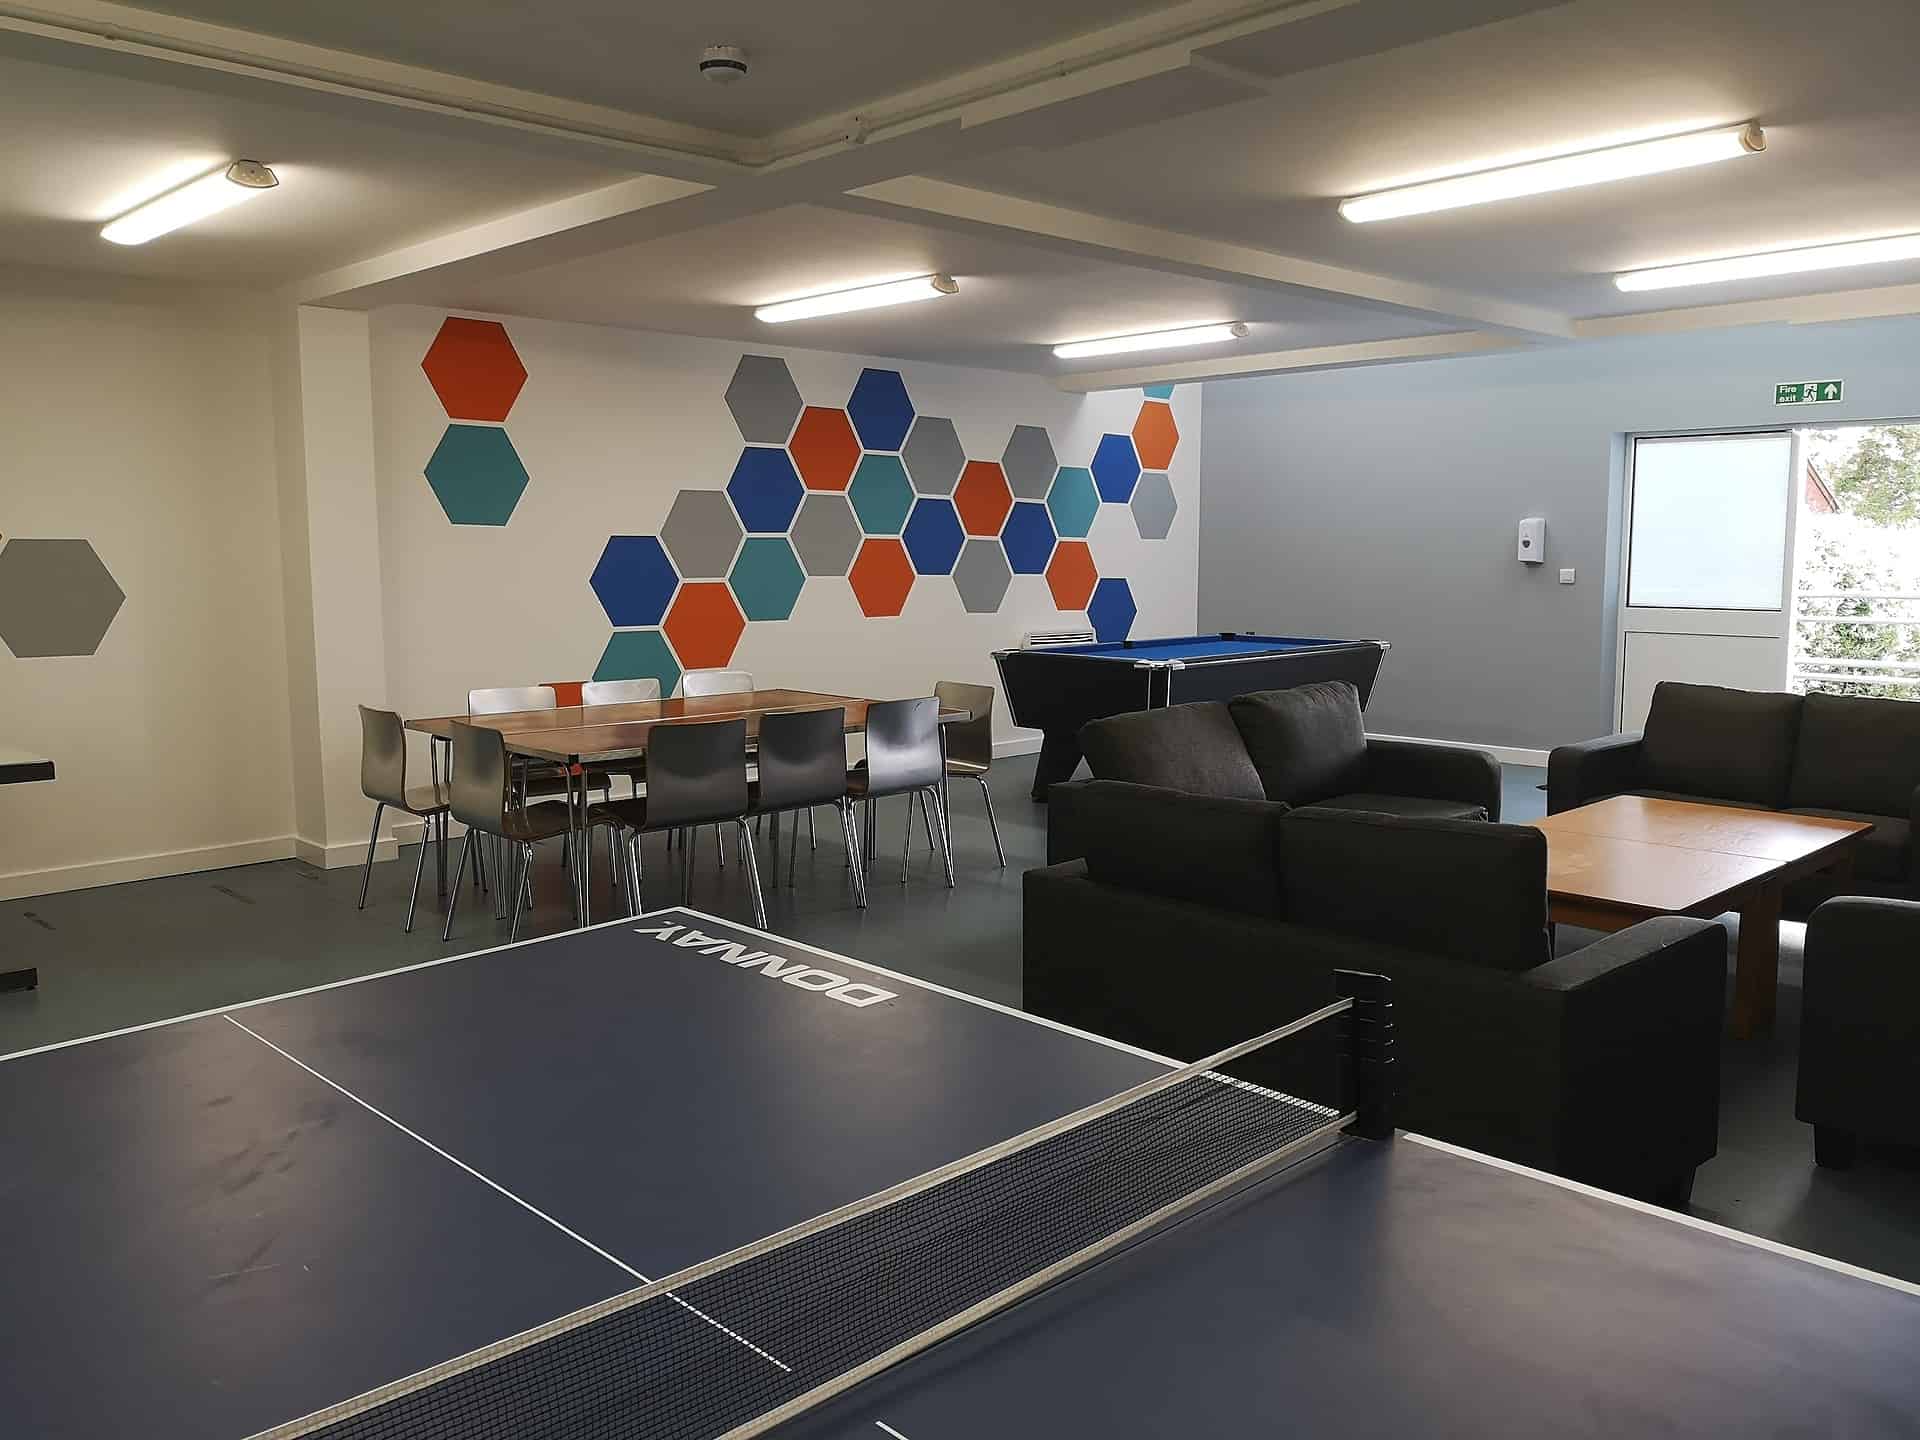 Colourful wall with blue table tennis table and sofas in the hub